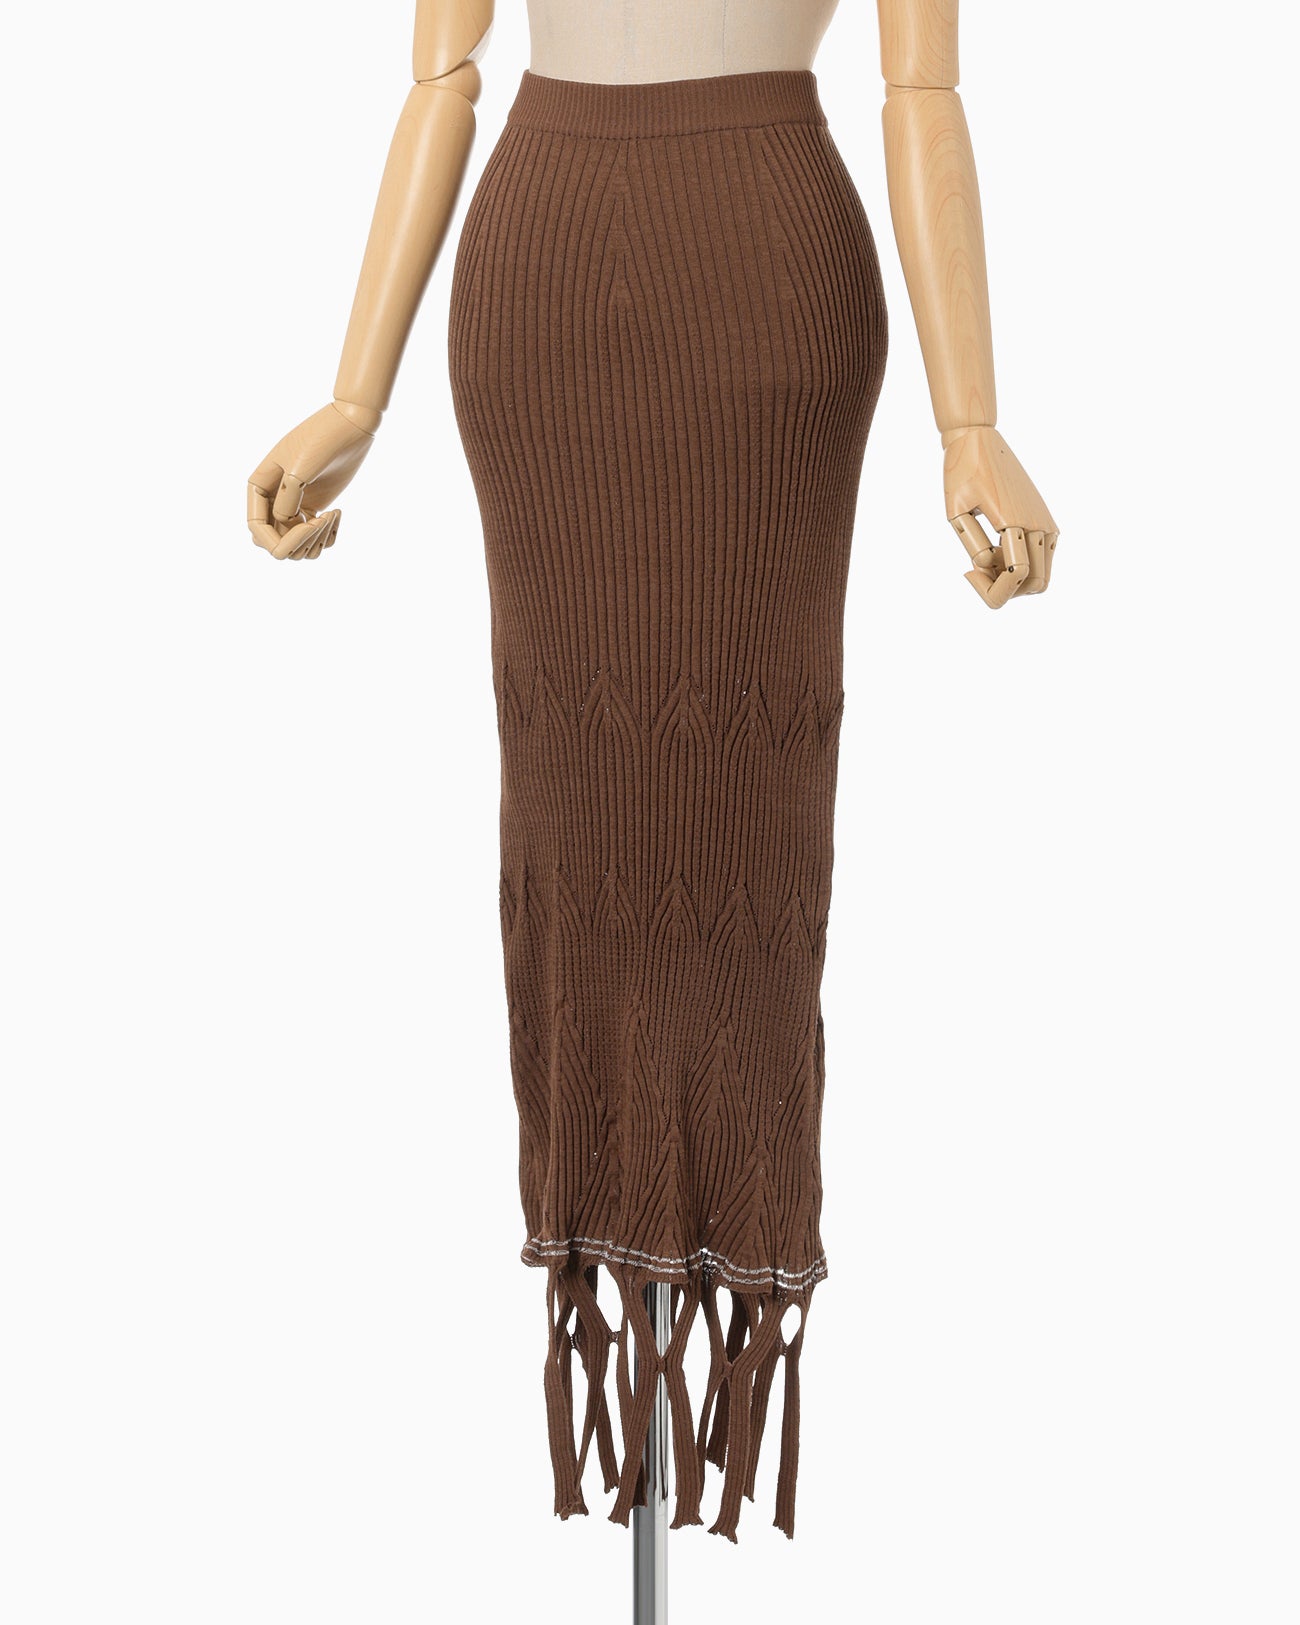 Basket Weave Detailed Knitted Skirt - brown